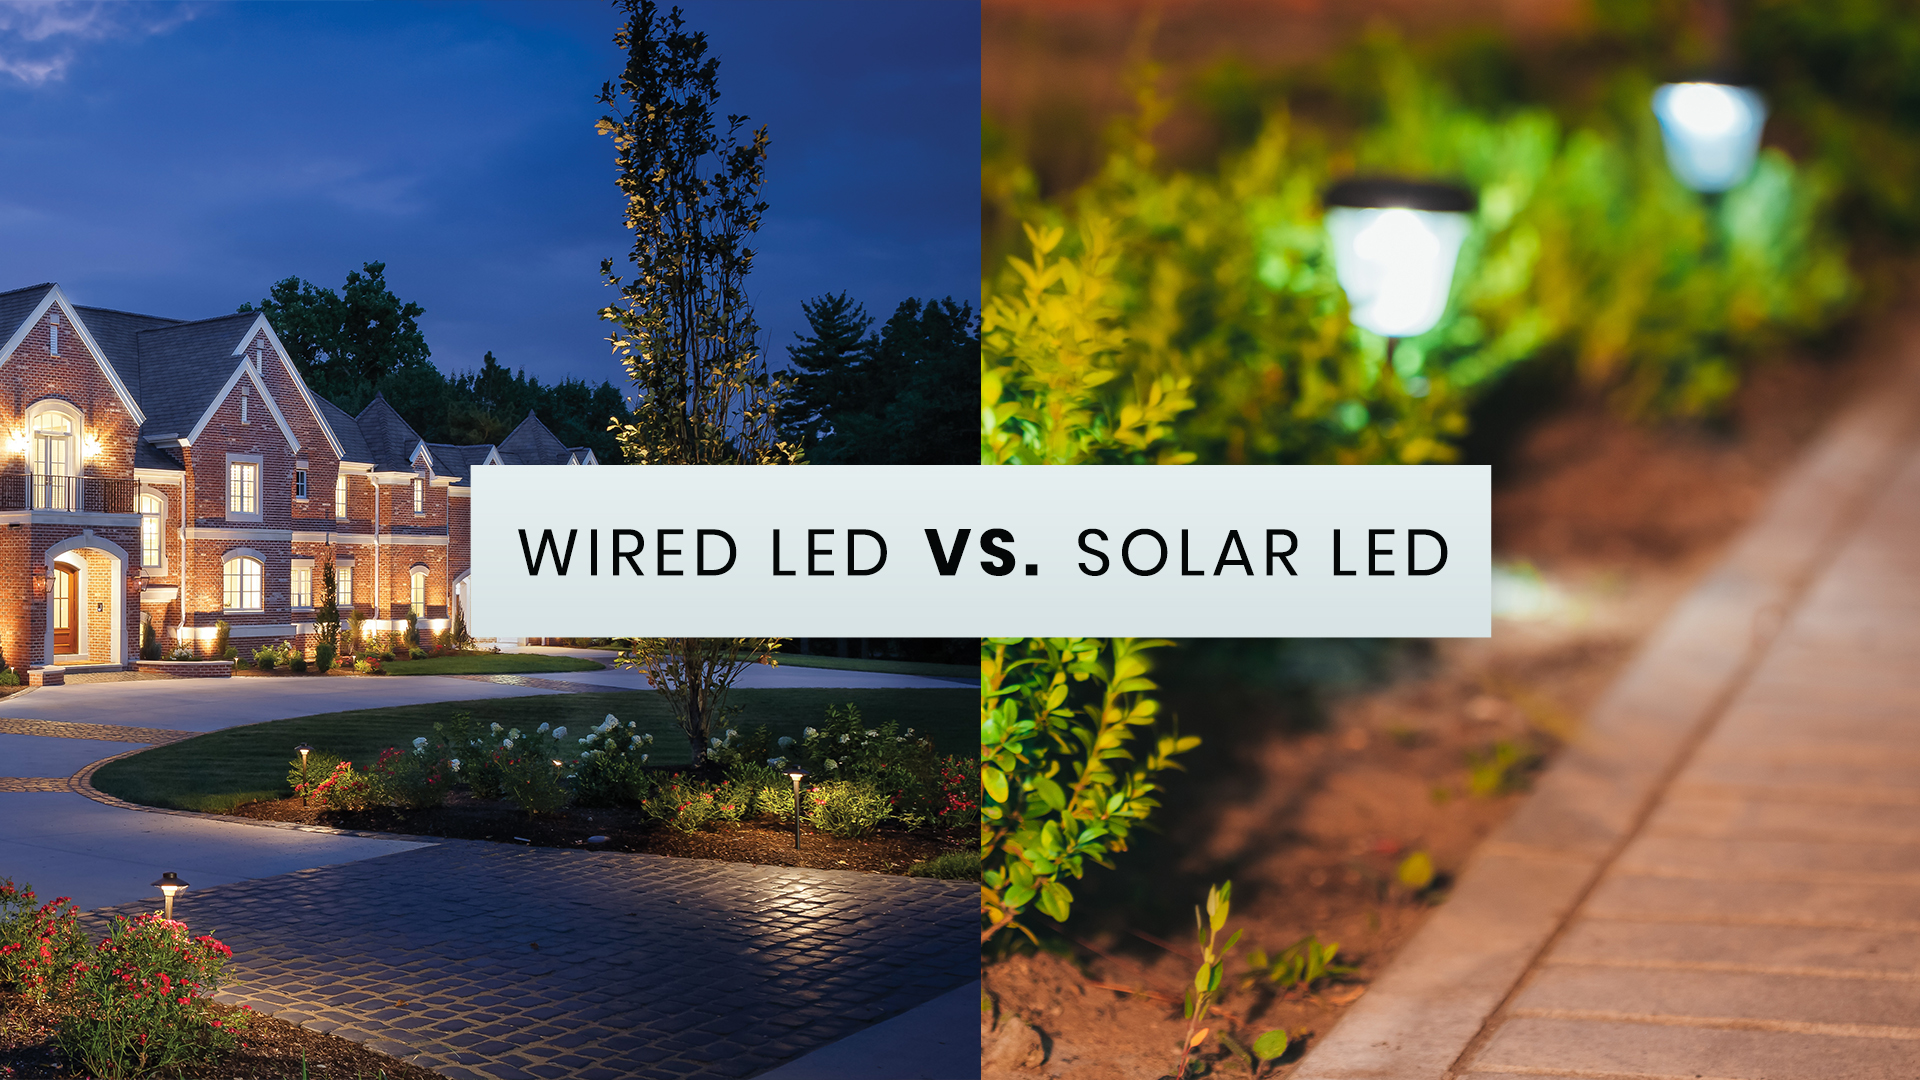 Why Wired LED vs. Solar LED Outdoor Lighting?